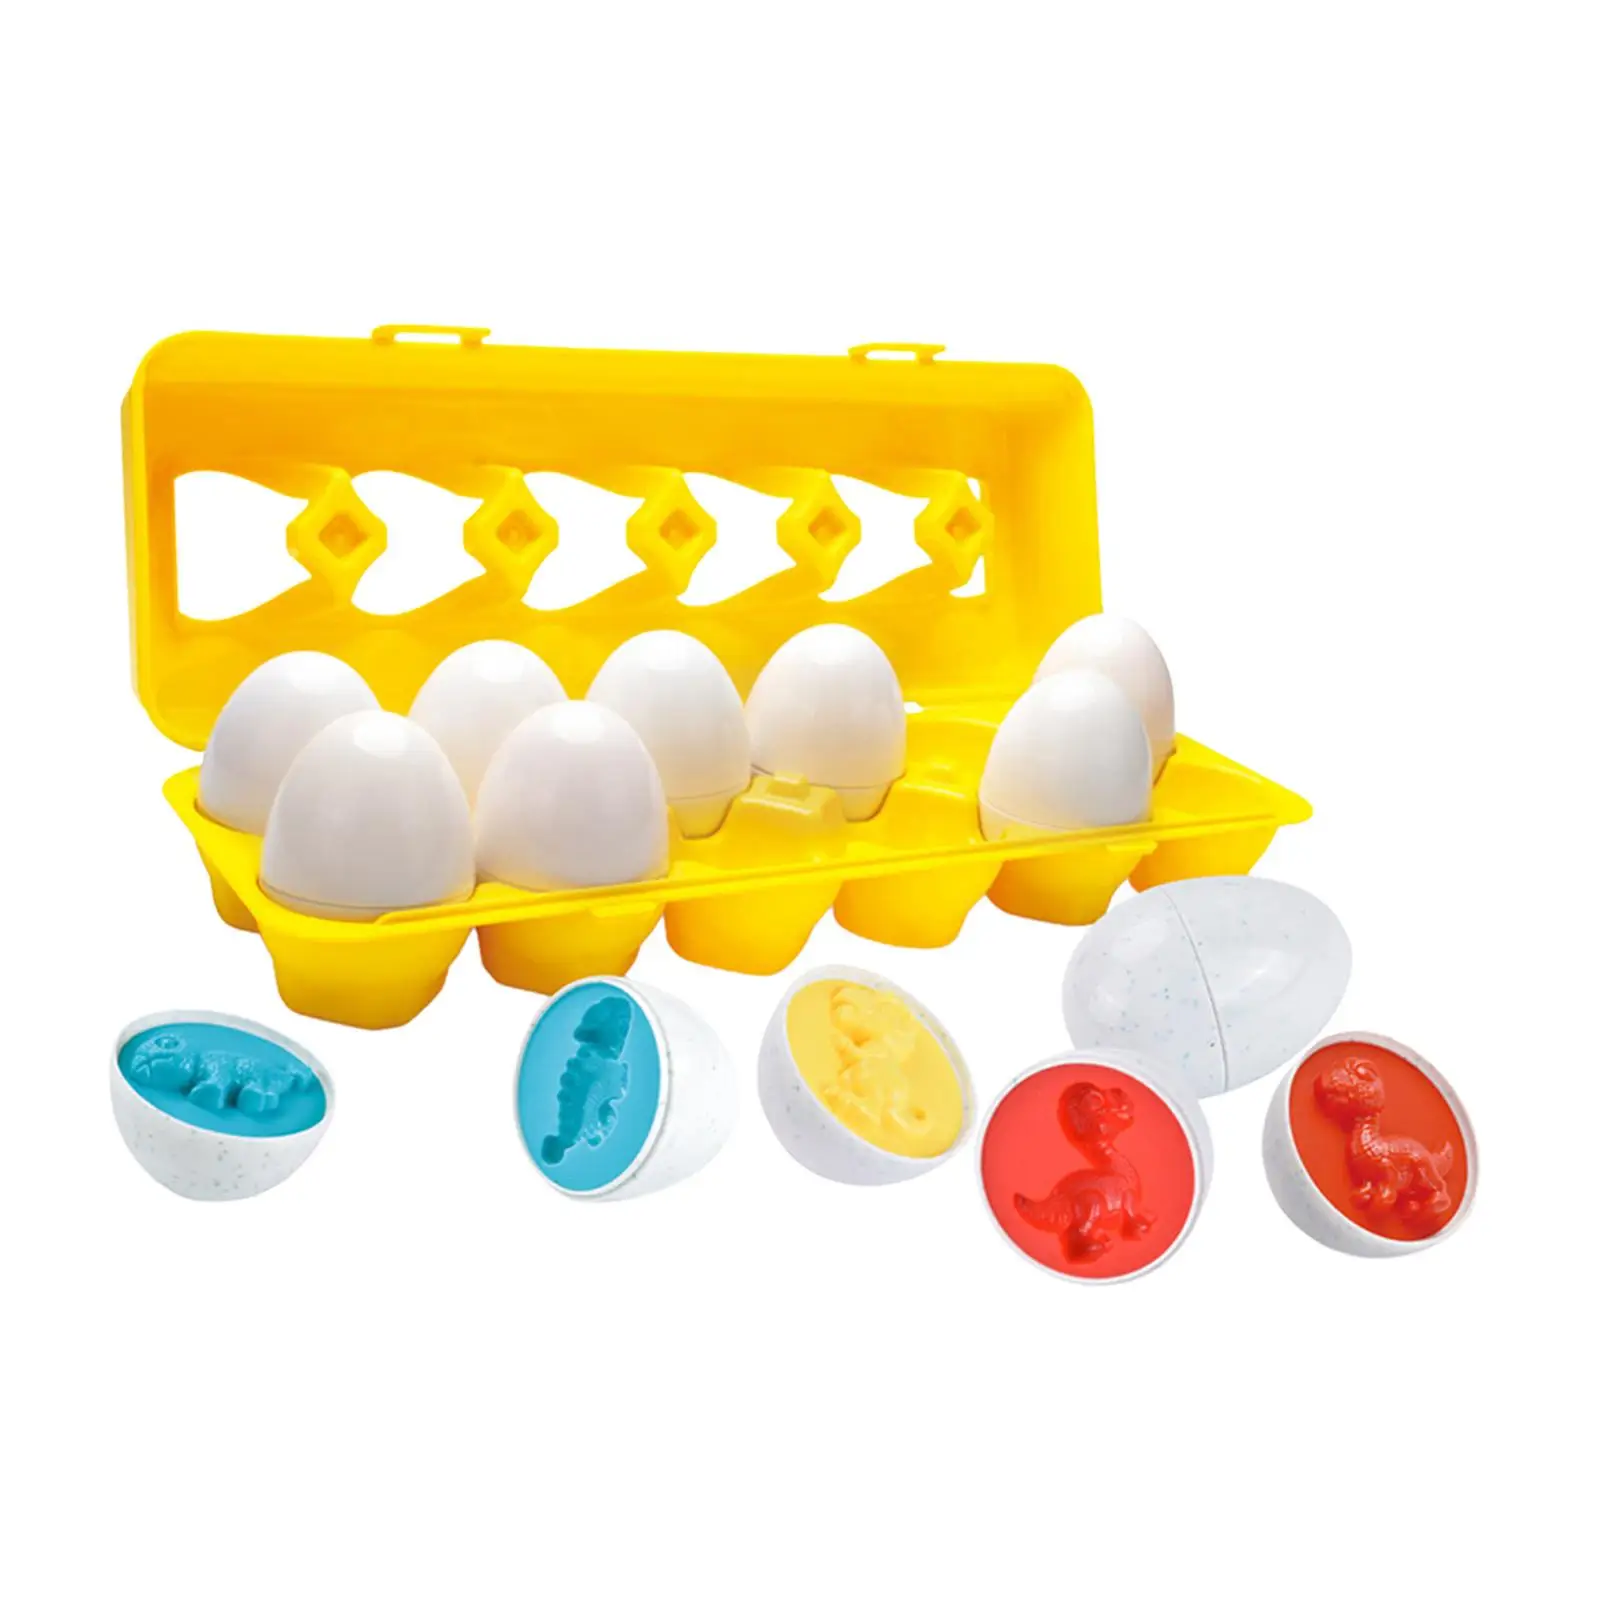 12x Matching Egg Play Set Shape Sorting & Color Recognition Montessori Toy for 3 4 5 6 Years Old Easter Basket Gift Children